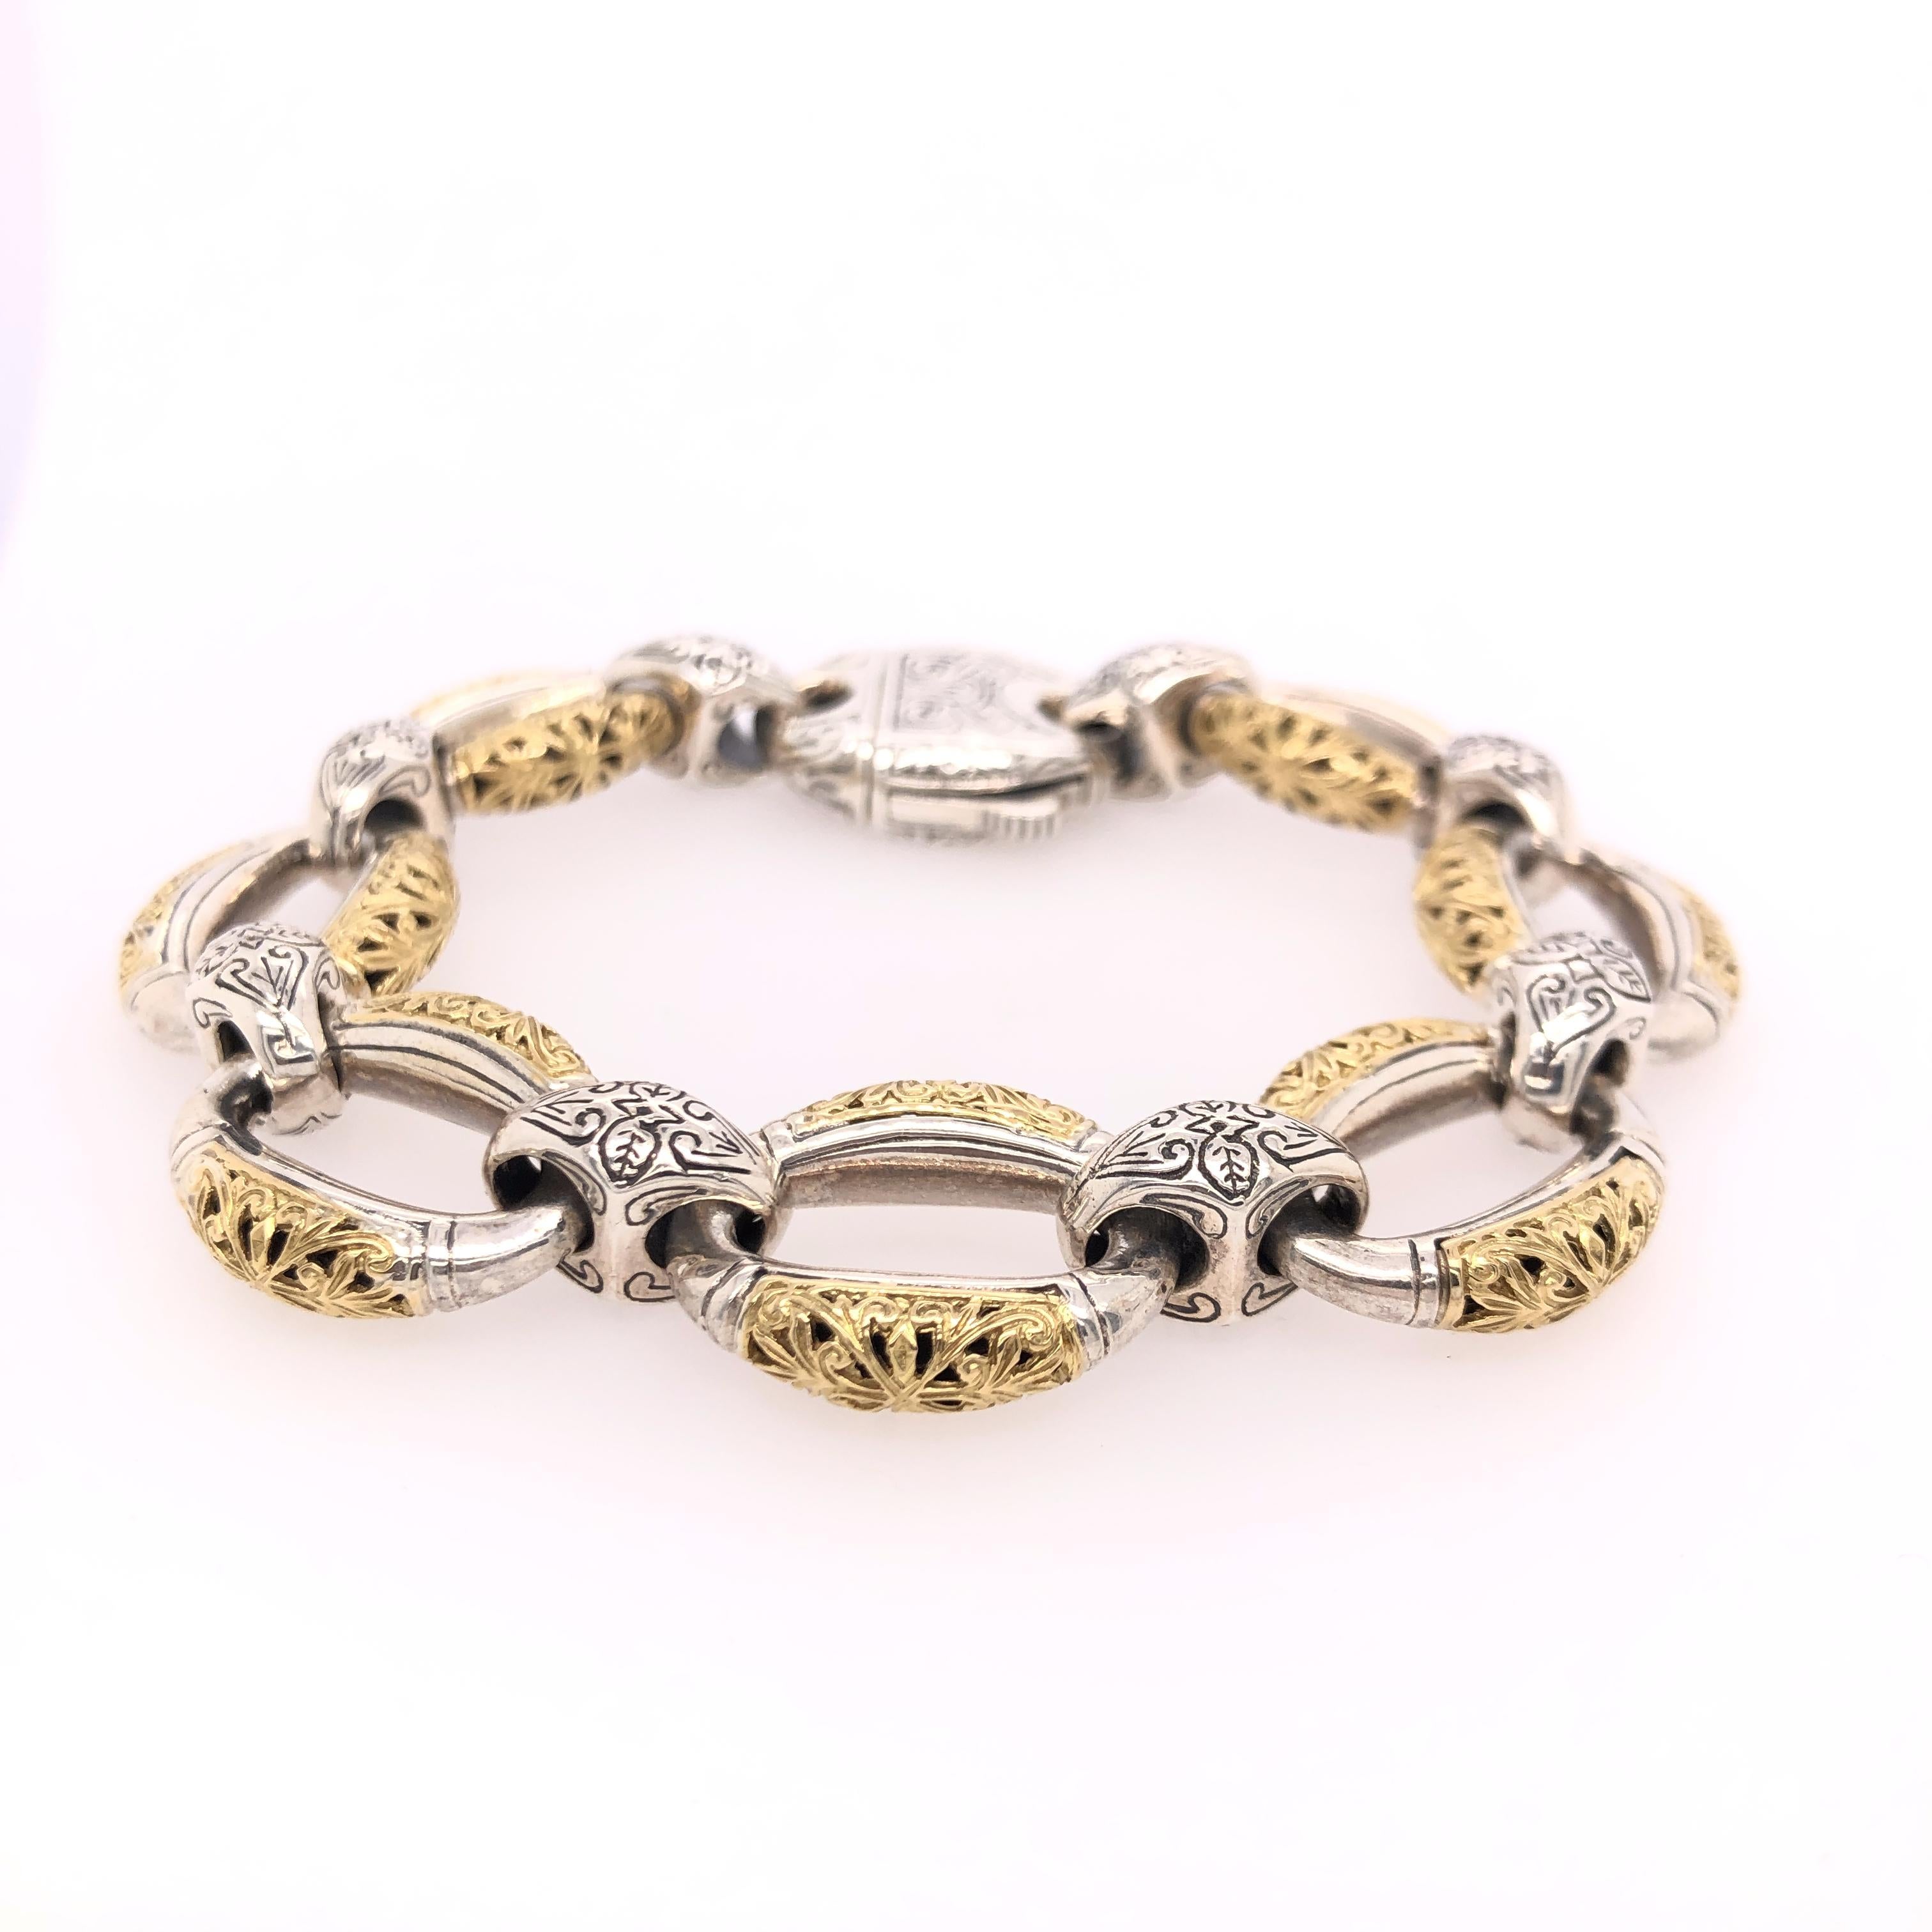 Material: Sterling Silver & 18k Gold
Size: One Size

Stamped: 750, 925, KONSTANTINO